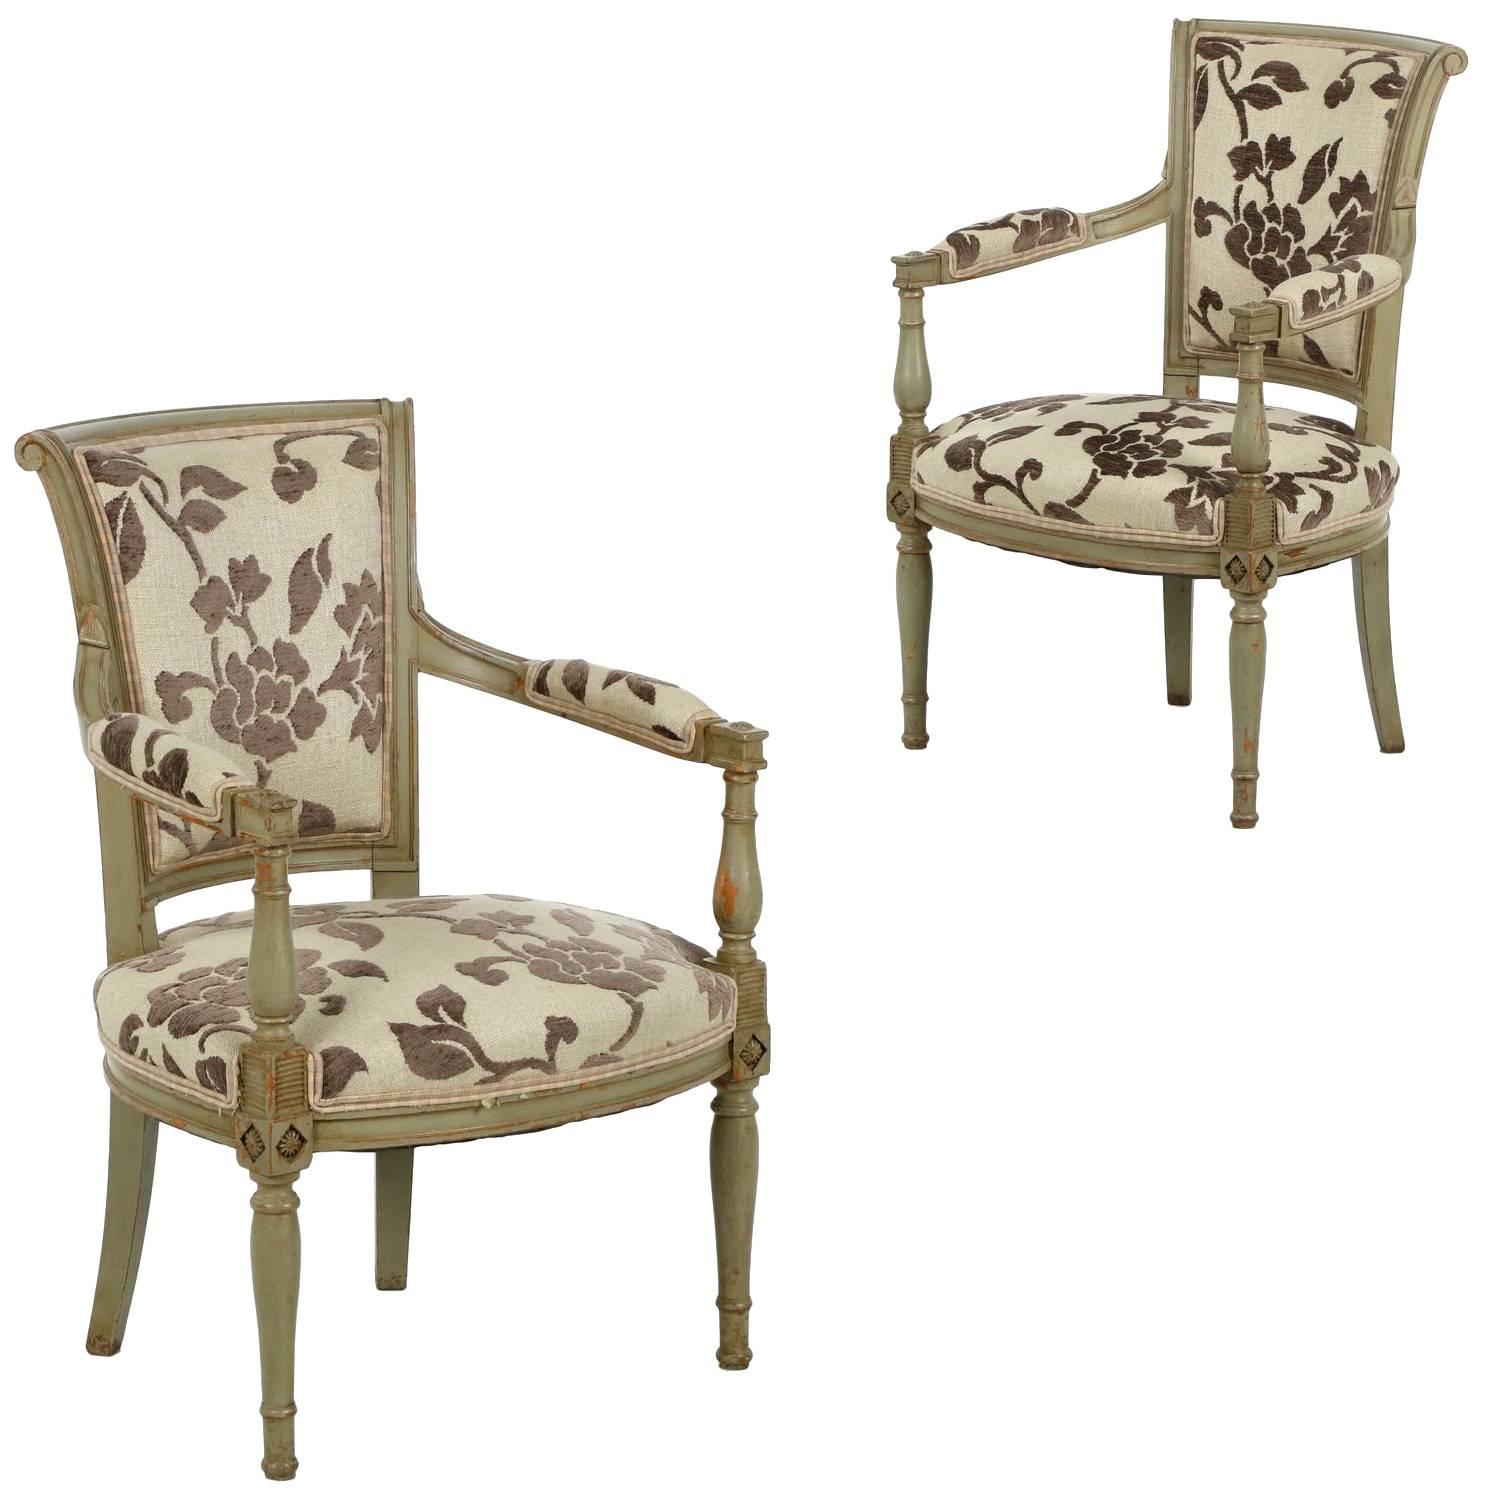 Pair of French Neoclassical Antique Green Painted Arm Chairs